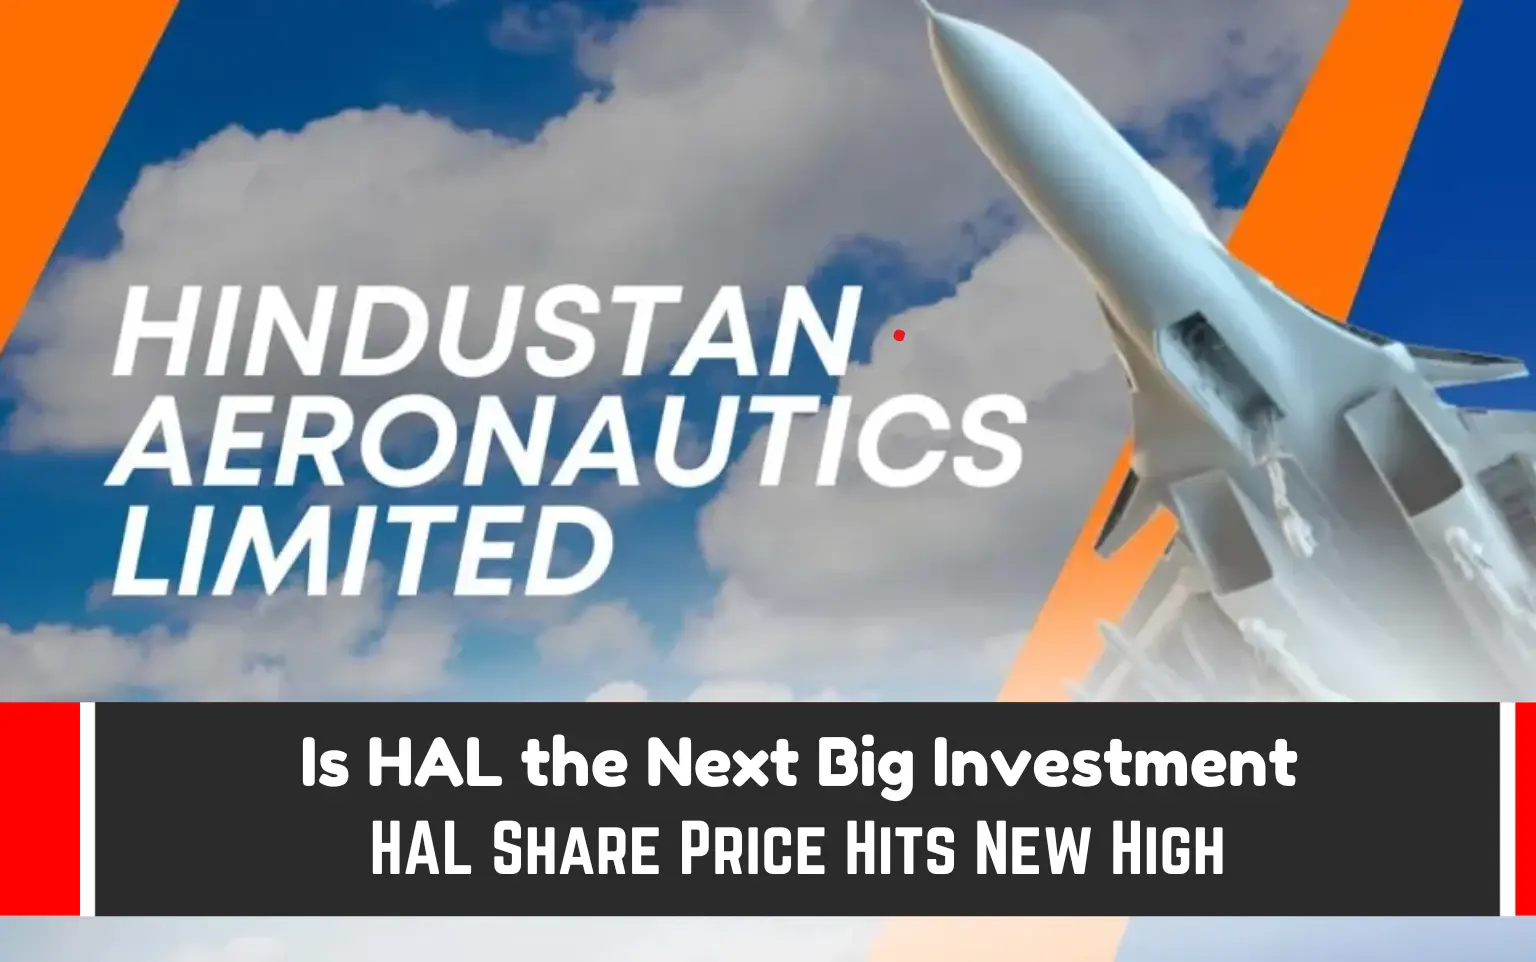 HAL's Q4 Results HAL Share Price Hits New High Is HAL the Next Big Investmentimage Via Vajiram & Ravi